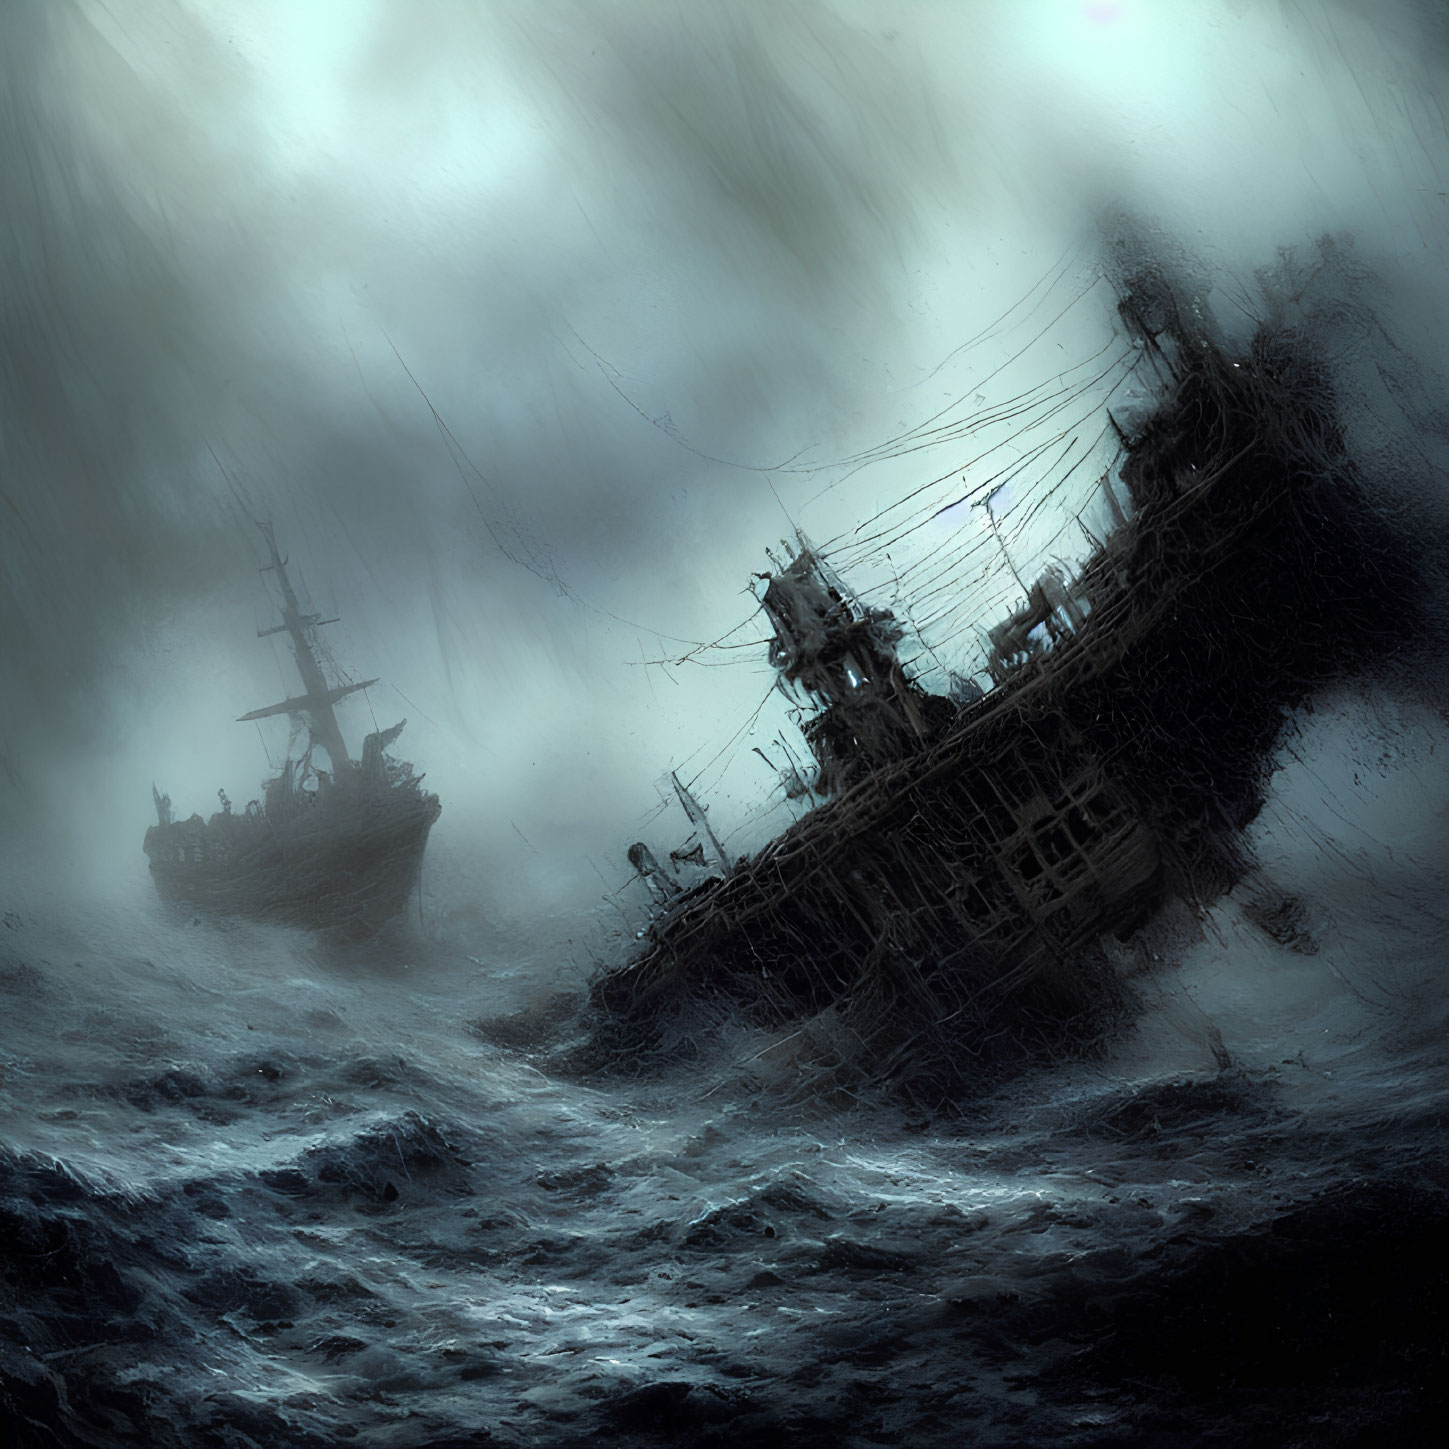 Stormy Sea with Two Ships in Ominous Scene